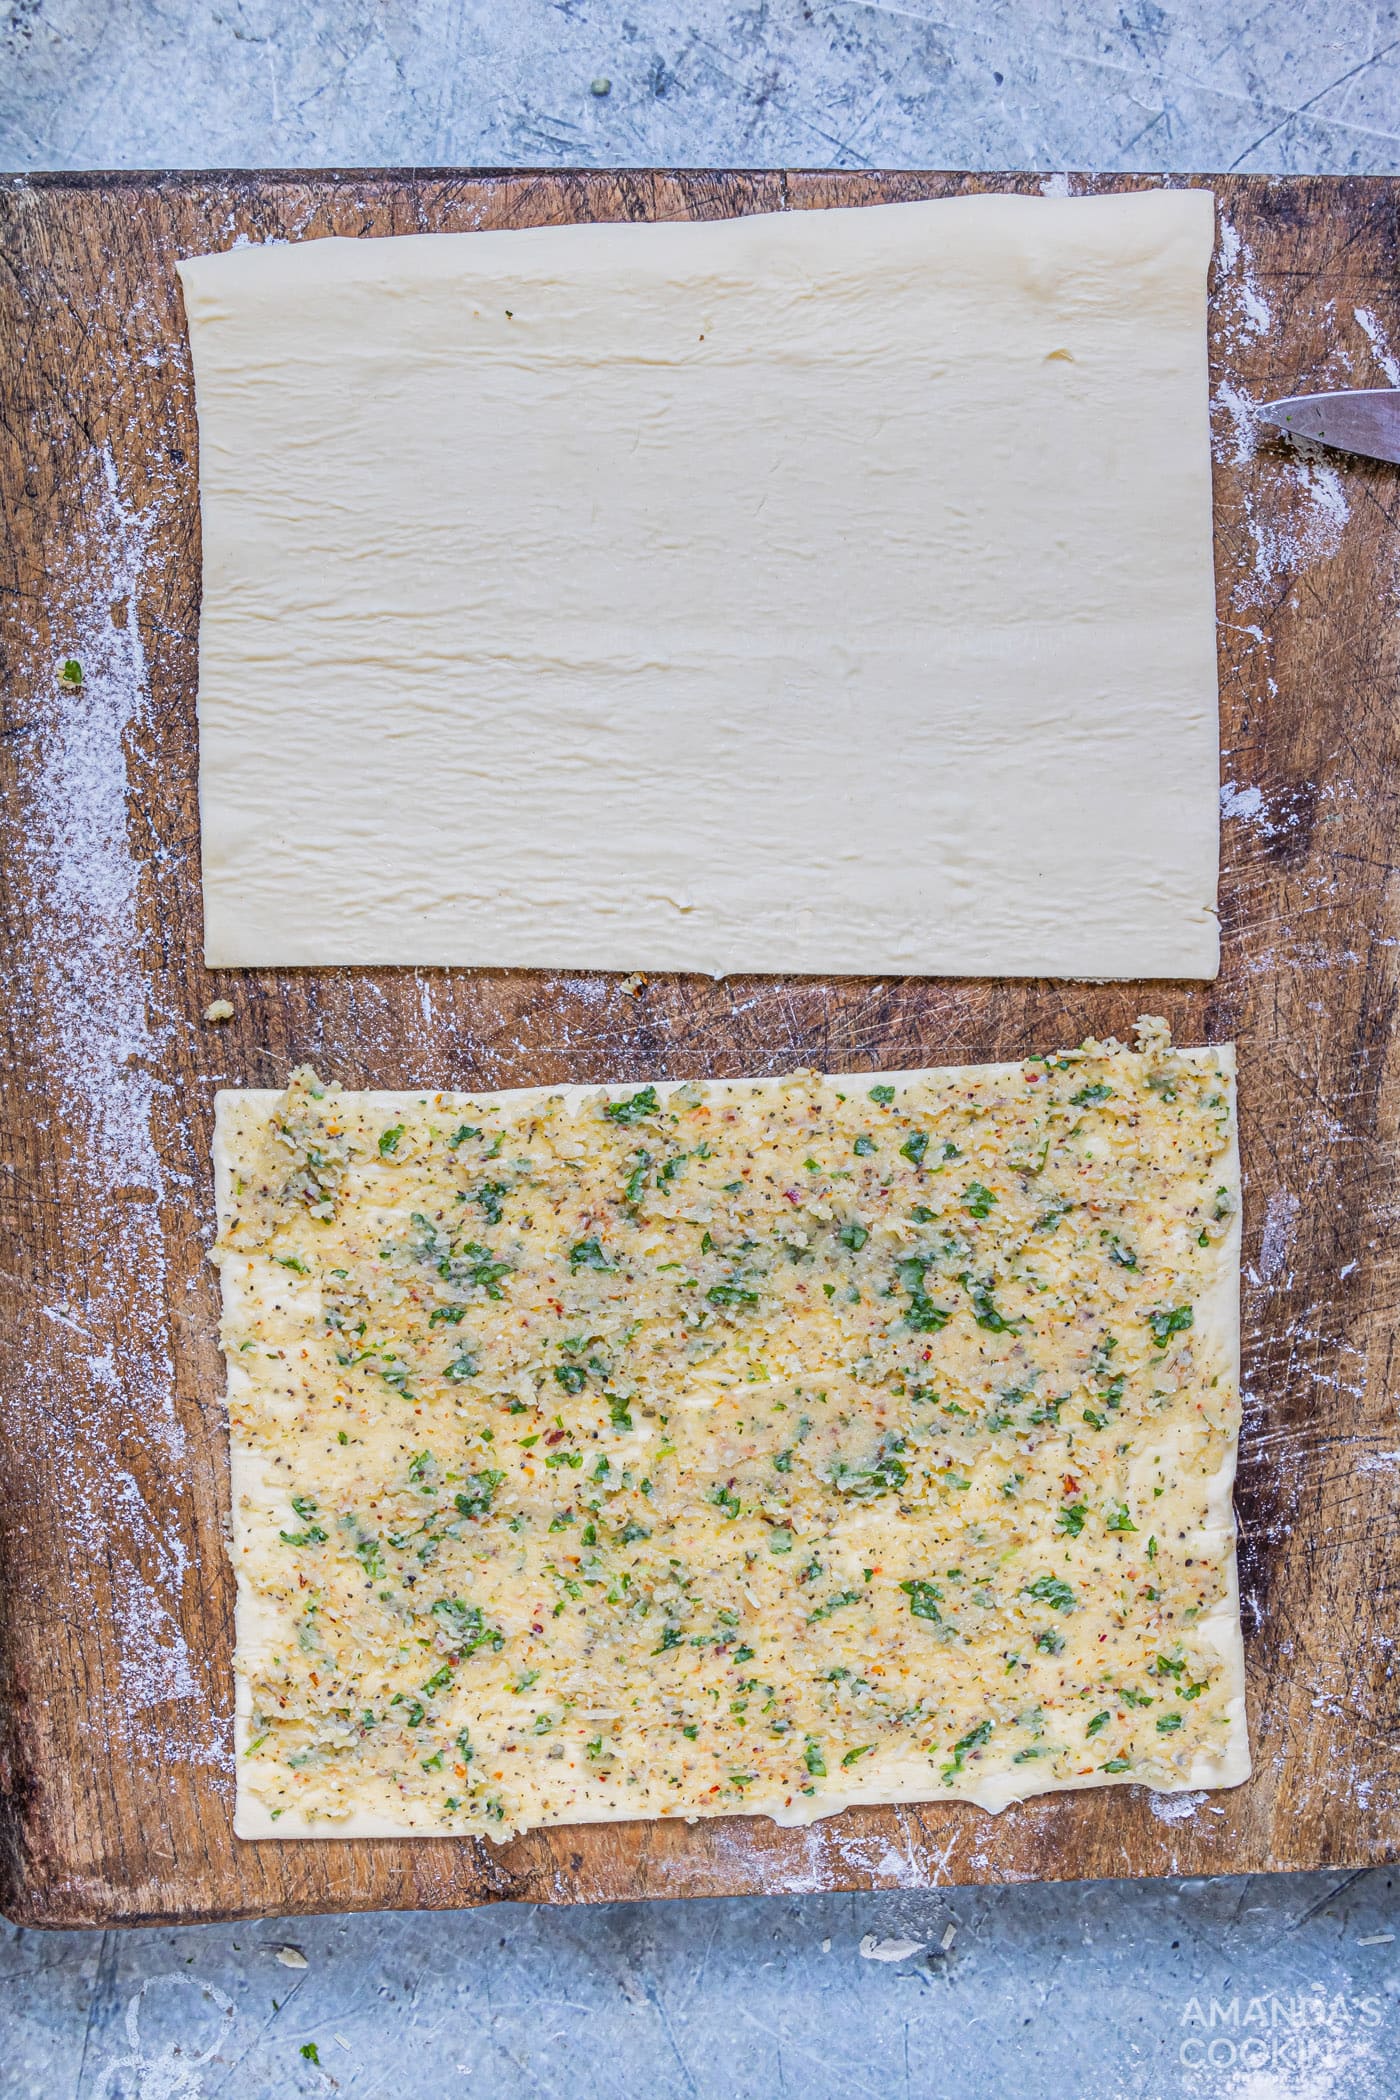 garlic butter smeared onto puff pastry sheet